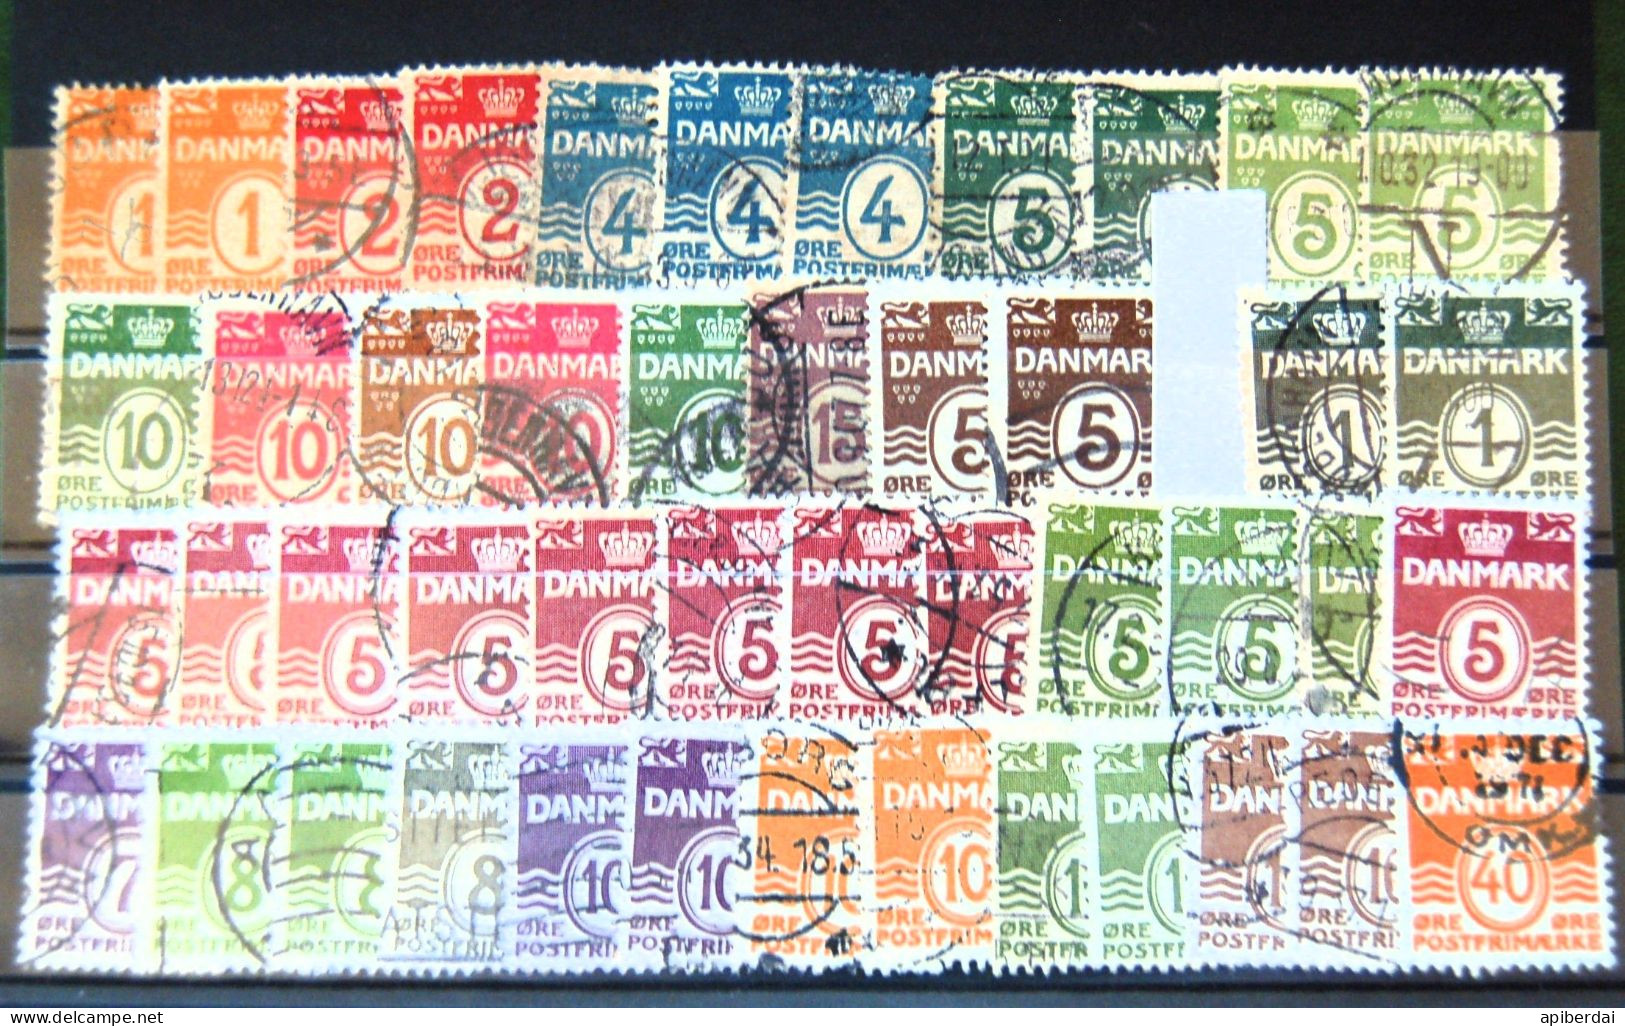 Danmark Danemark Danish - Accumulation Of 45 Stamps "wavy Line" 19 Old + 27 New Used Separated By White Stick - Verzamelingen